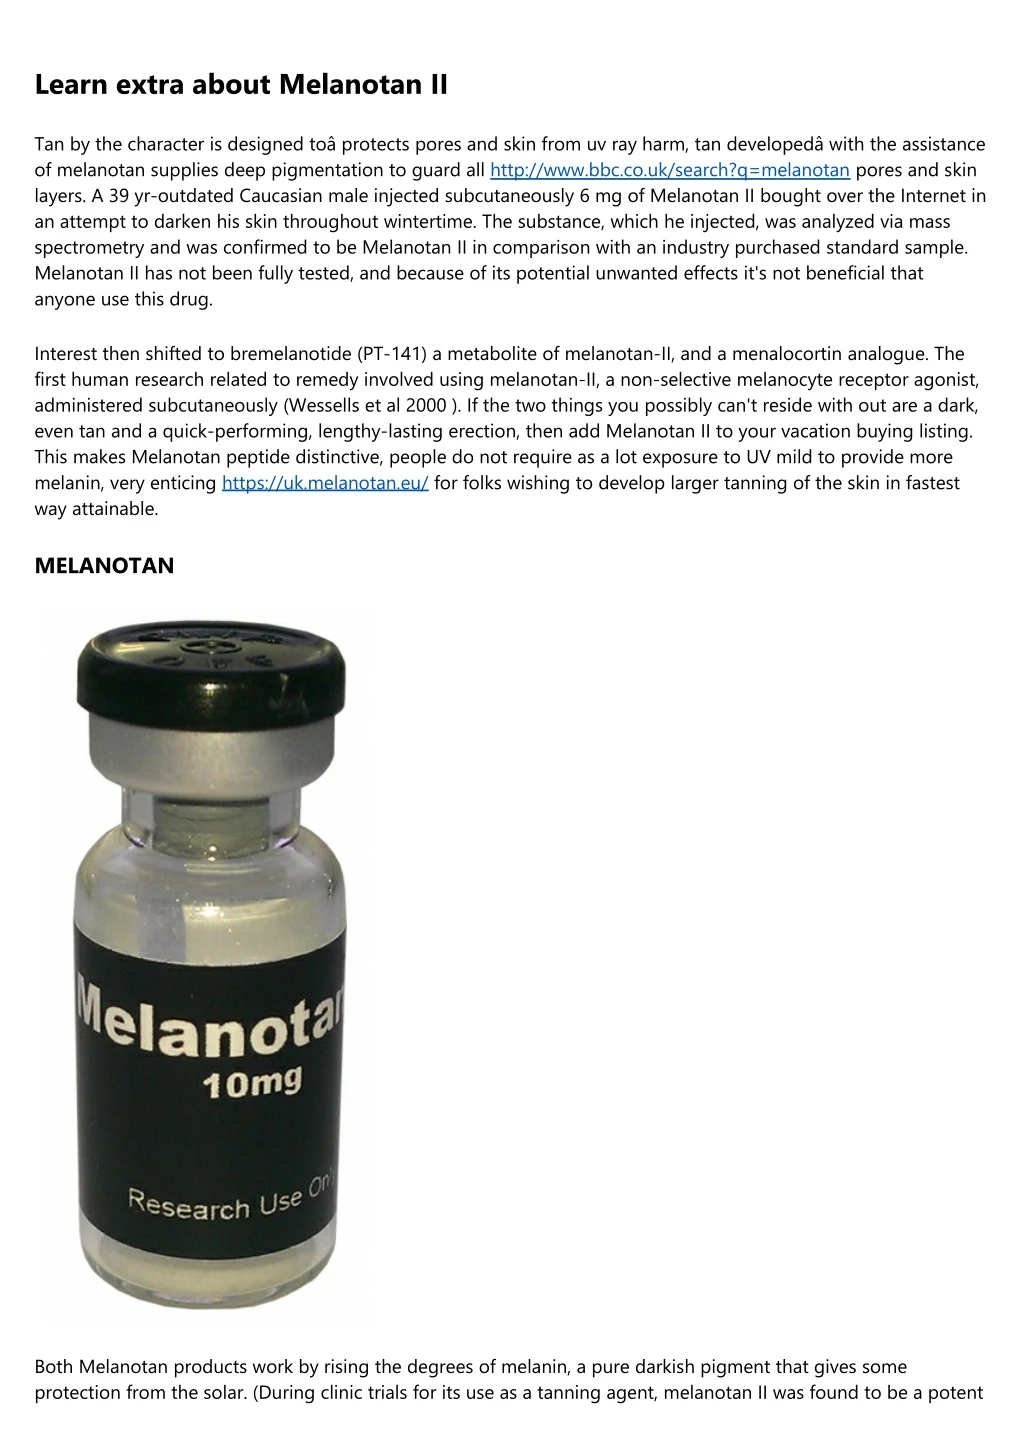 learn extra about melanotan ii